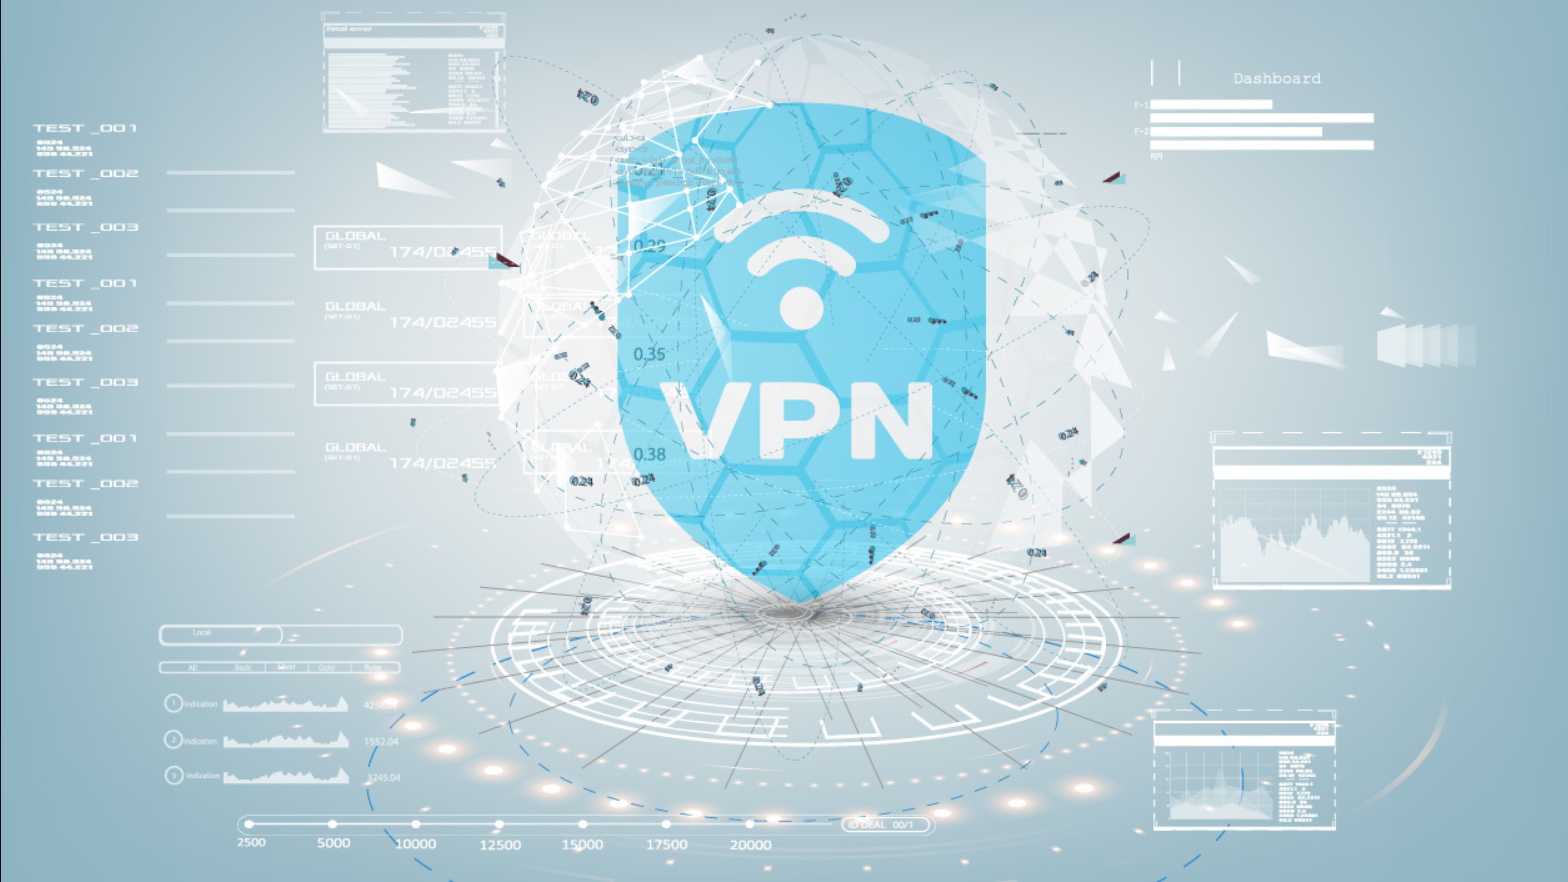 How To Test & Increase VPN Speed